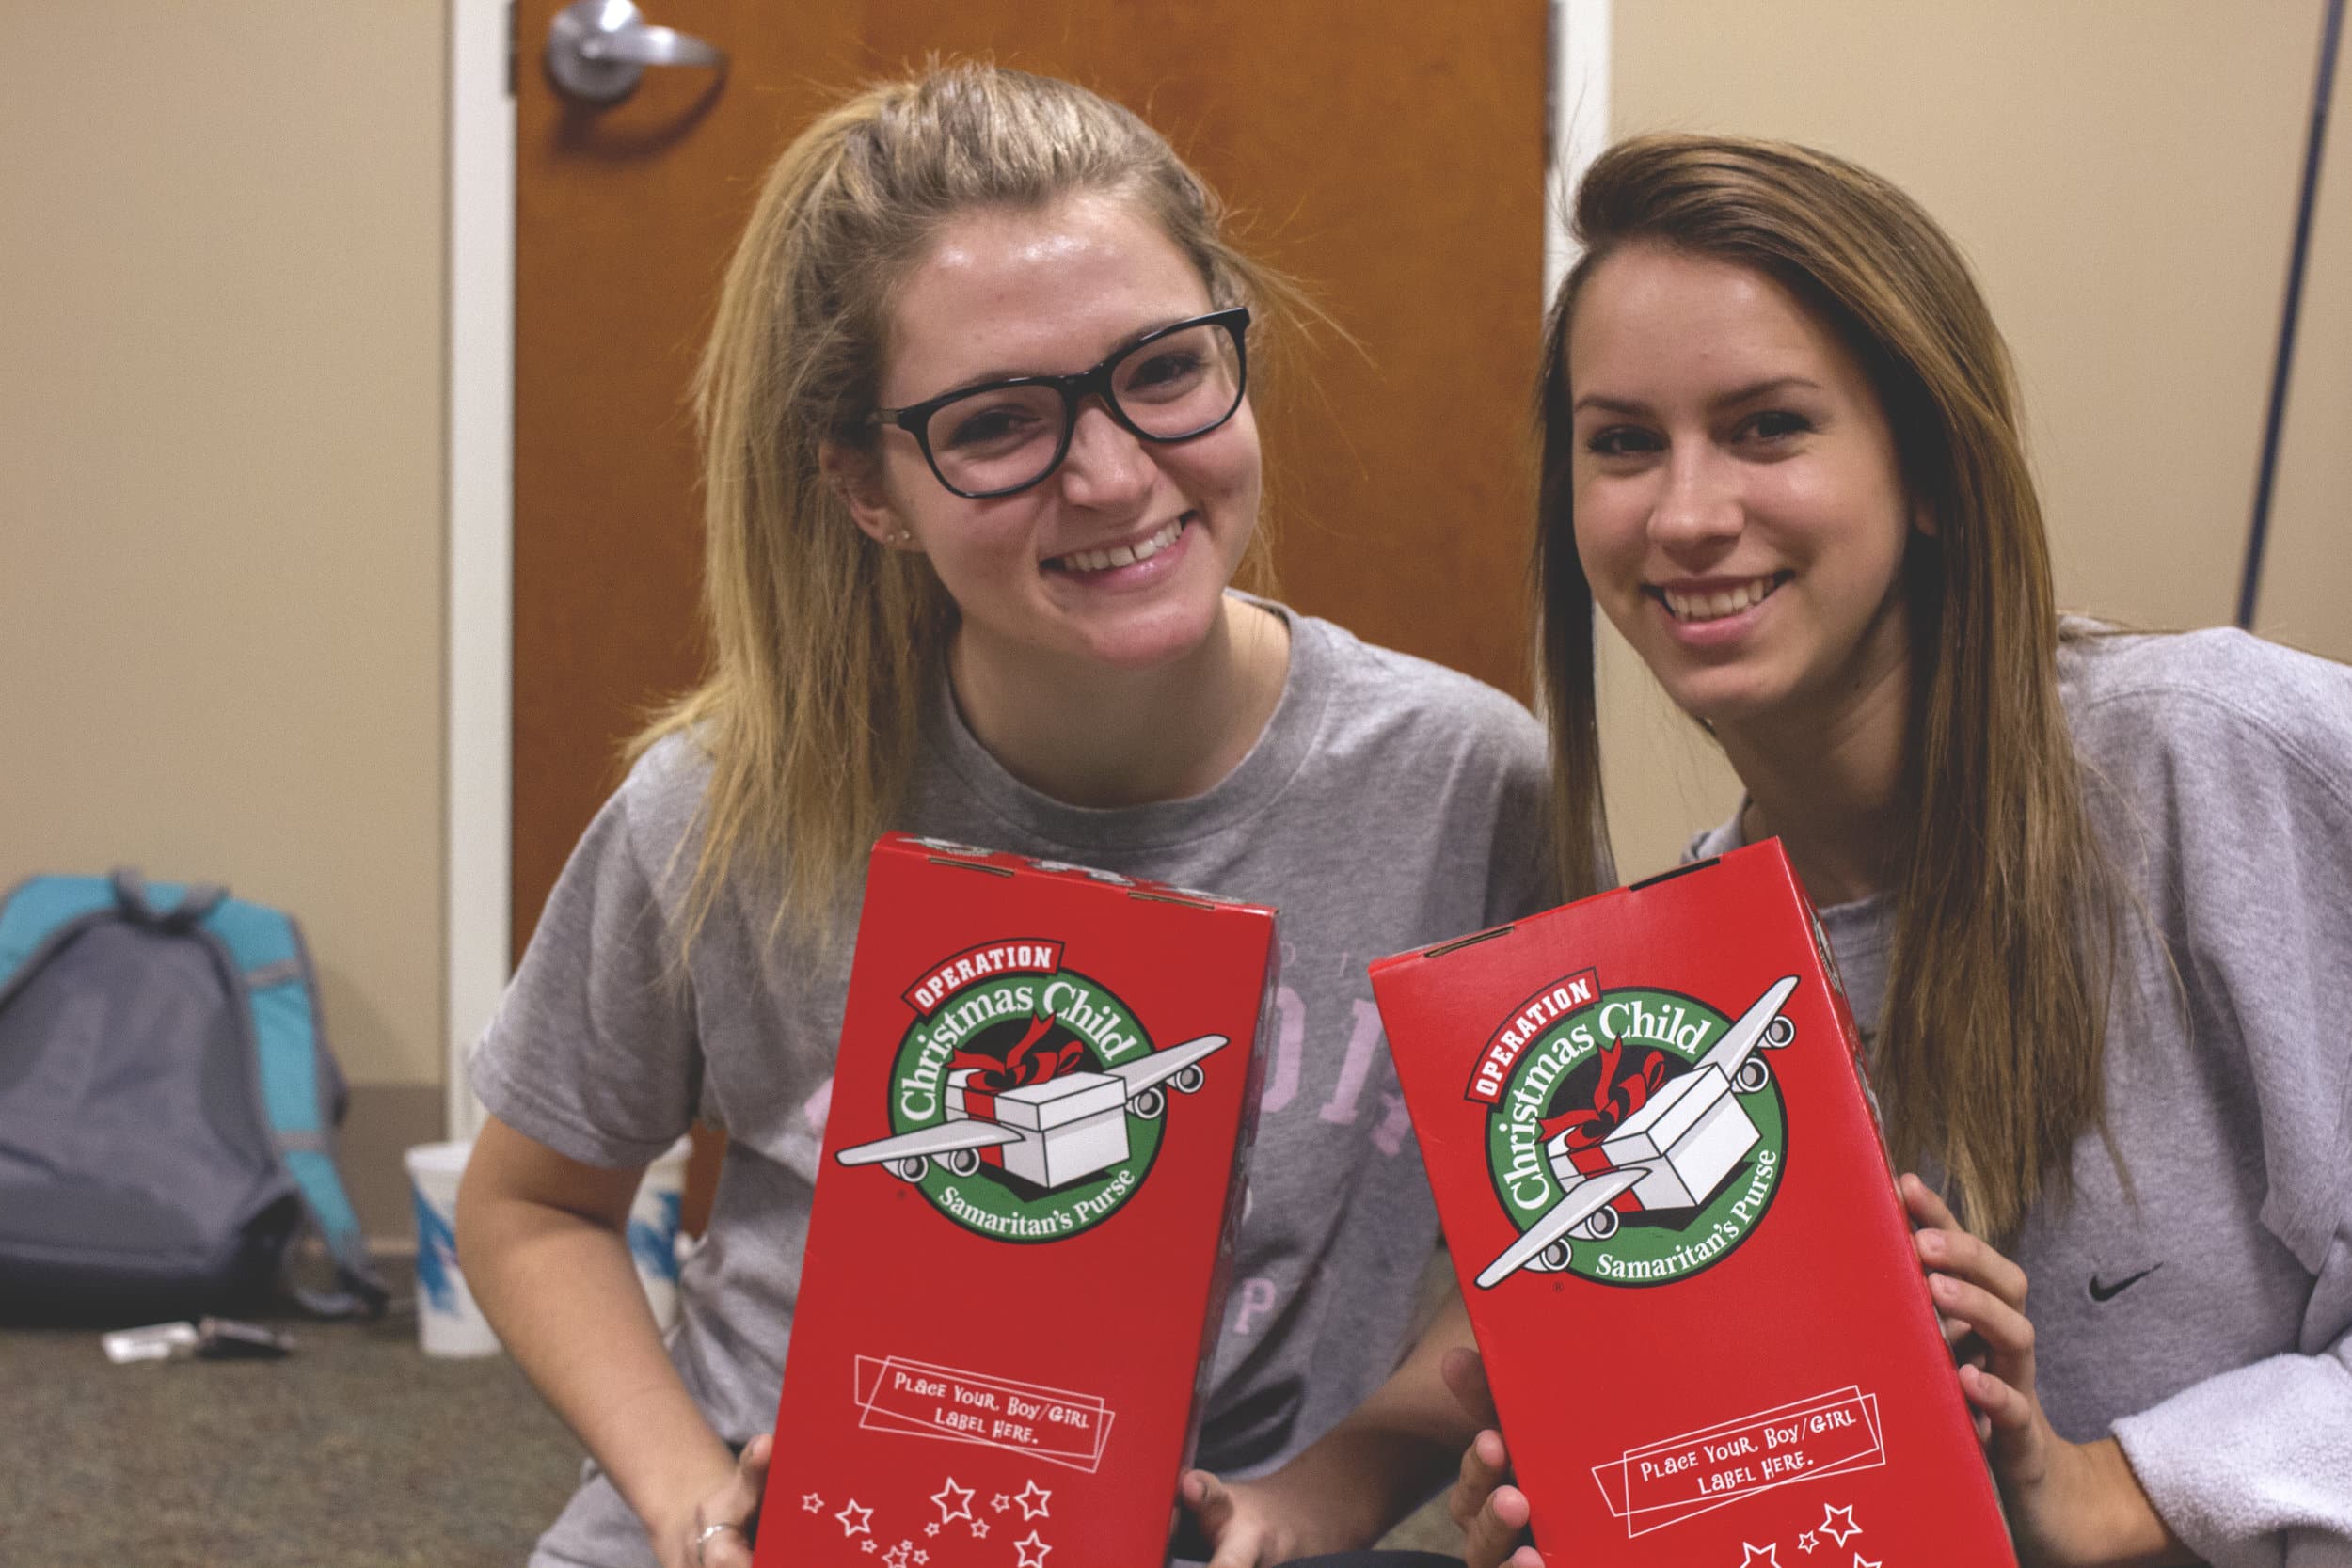  Brianne Wright (left) and Logan Wright (right)&nbsp;share how they love to help people and that is what has inspired them to be a part of Operation Christmas Child. Brianne talked about how she remembers doing this event in church when she was young